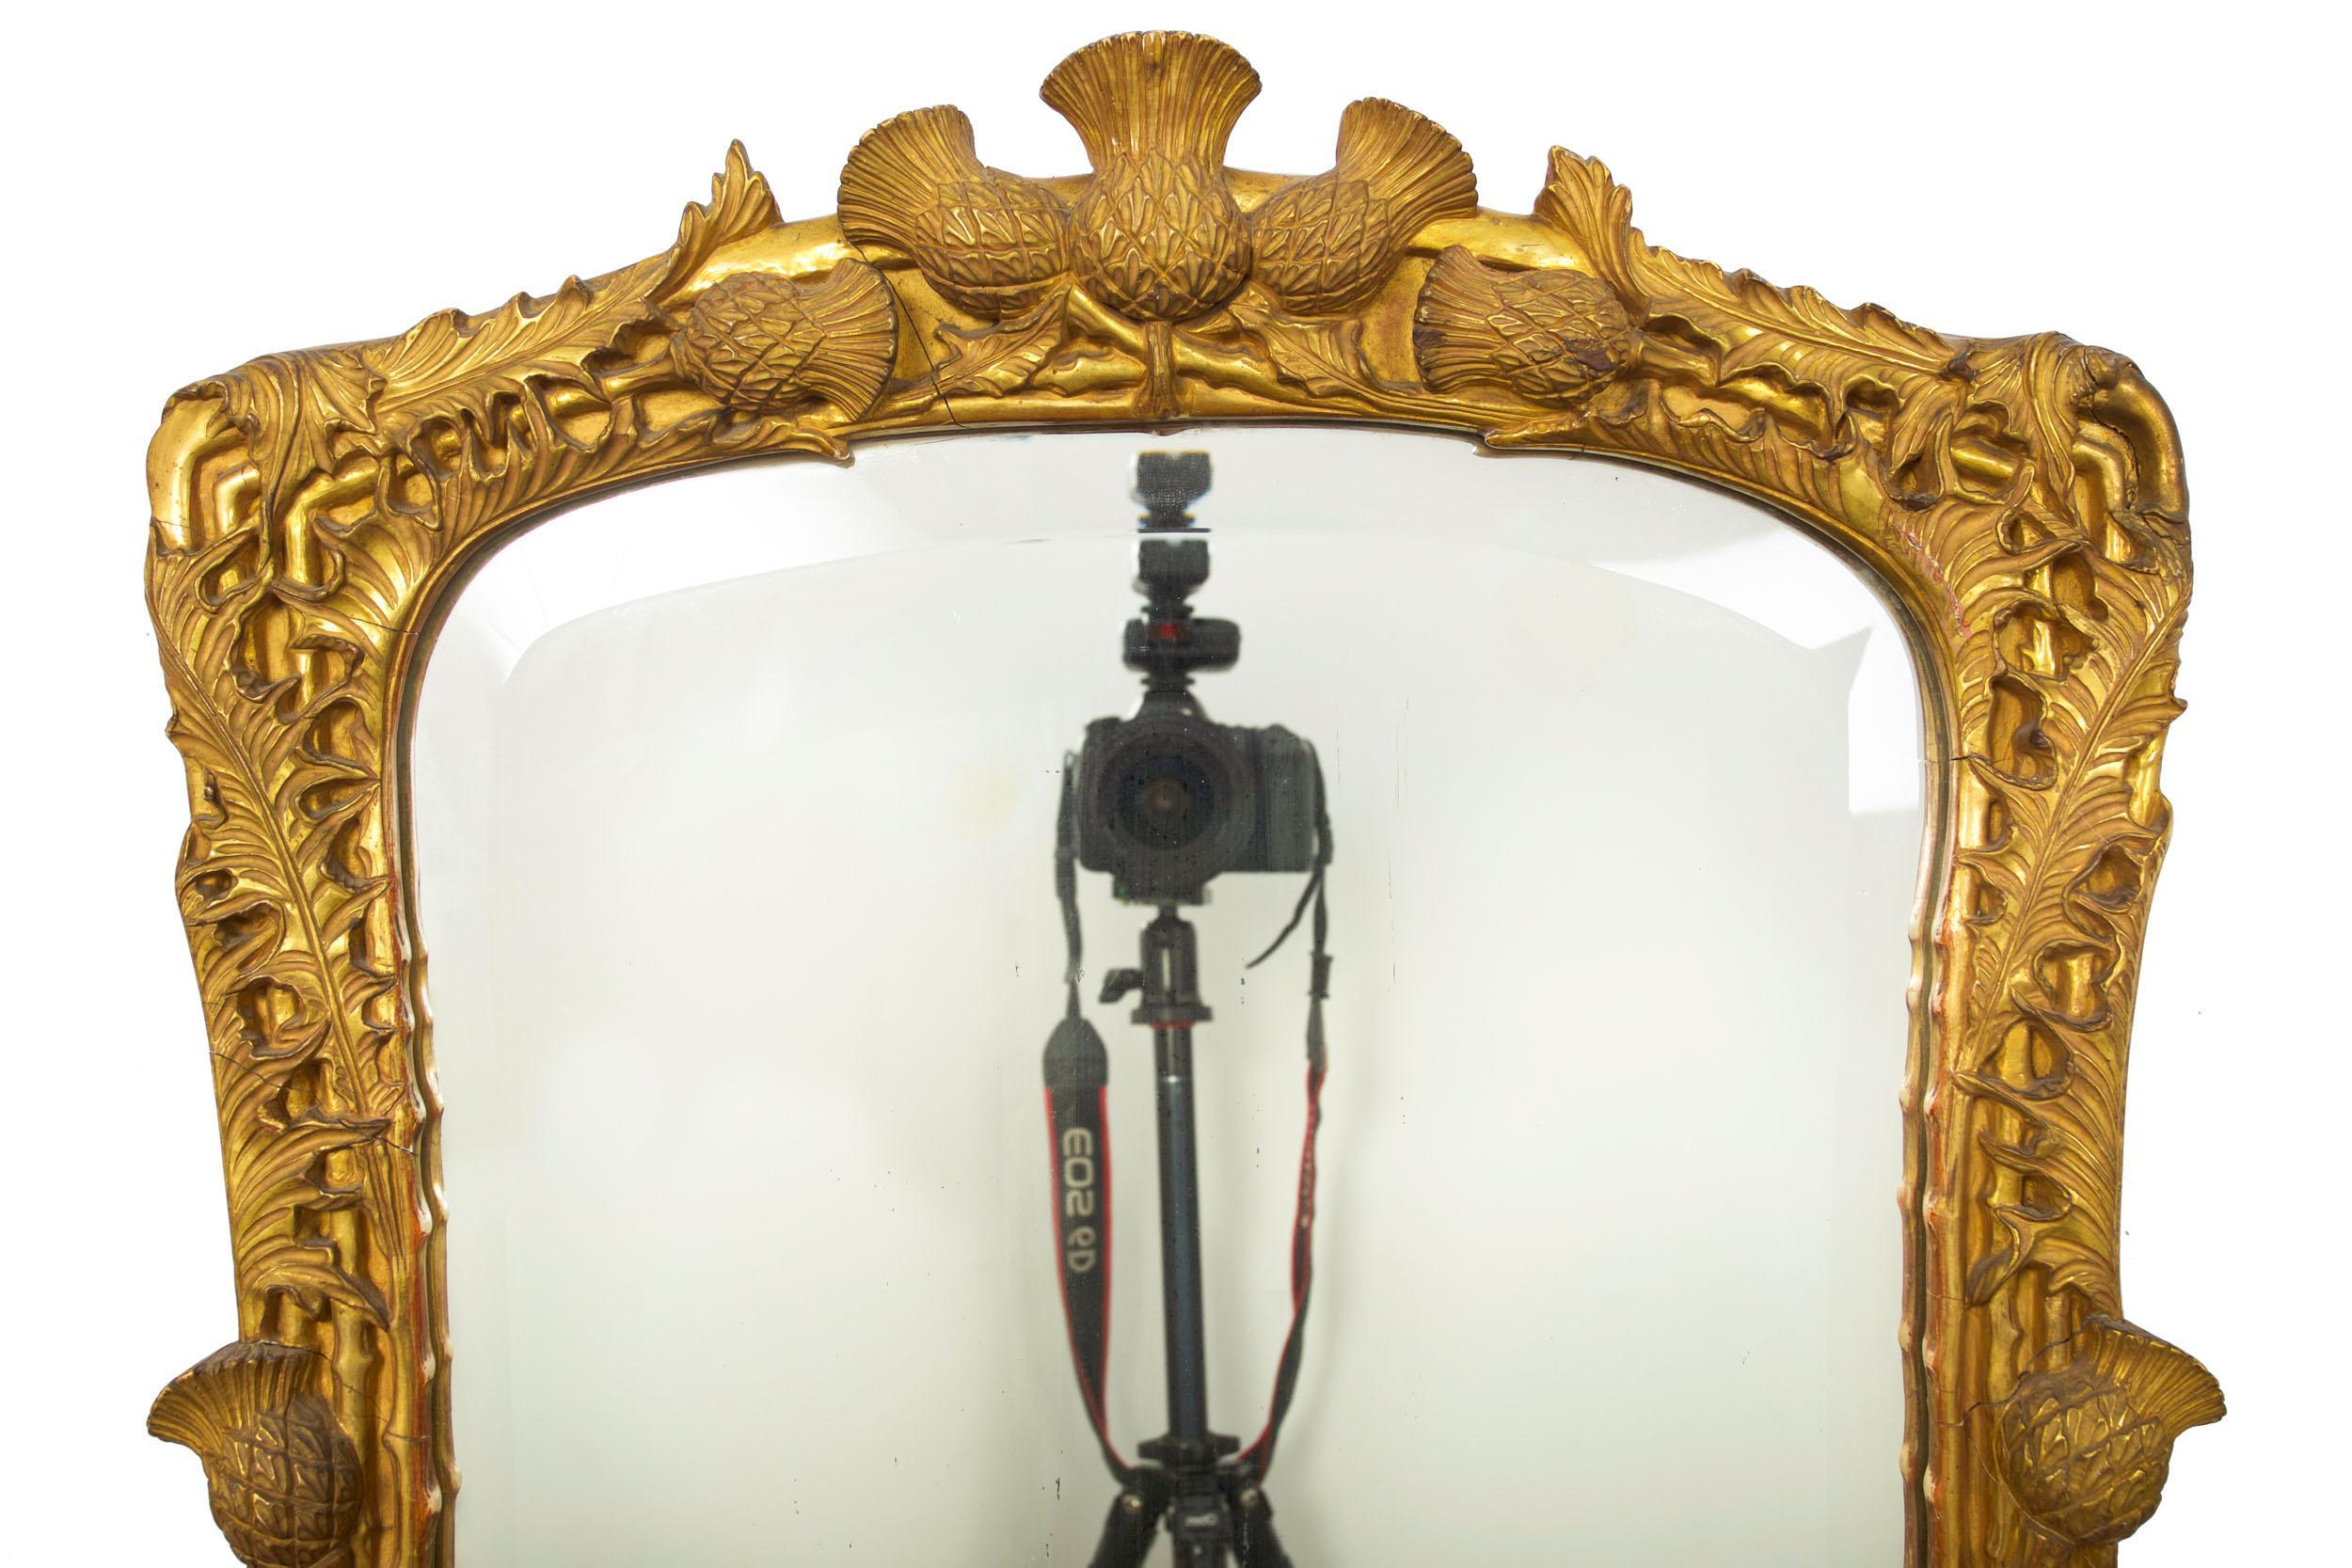 This incredibly fine and truly exquisite giltwood mirror features a dramatic overall carved frame with representations of thistles, roses and the thorny stalks lining the frame surrounding a beveled mirror. Crafted during the third quarter of the